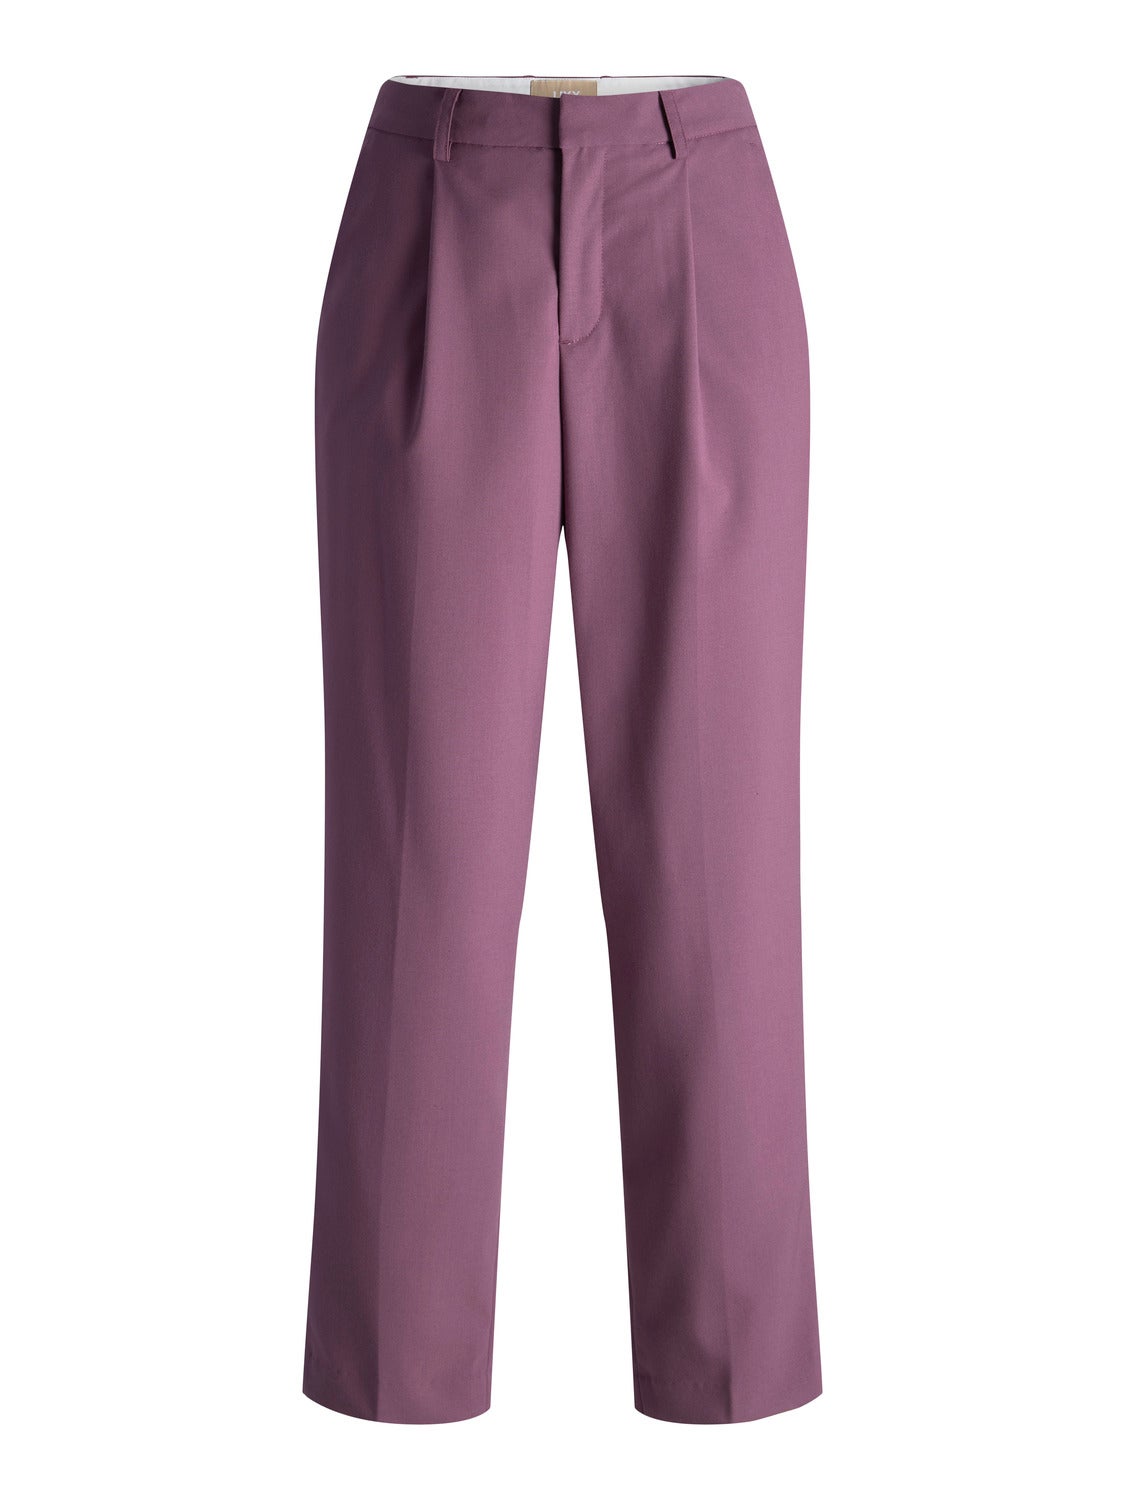 Soft regular-fit cotton stretch lounge pants with concealed drawstring